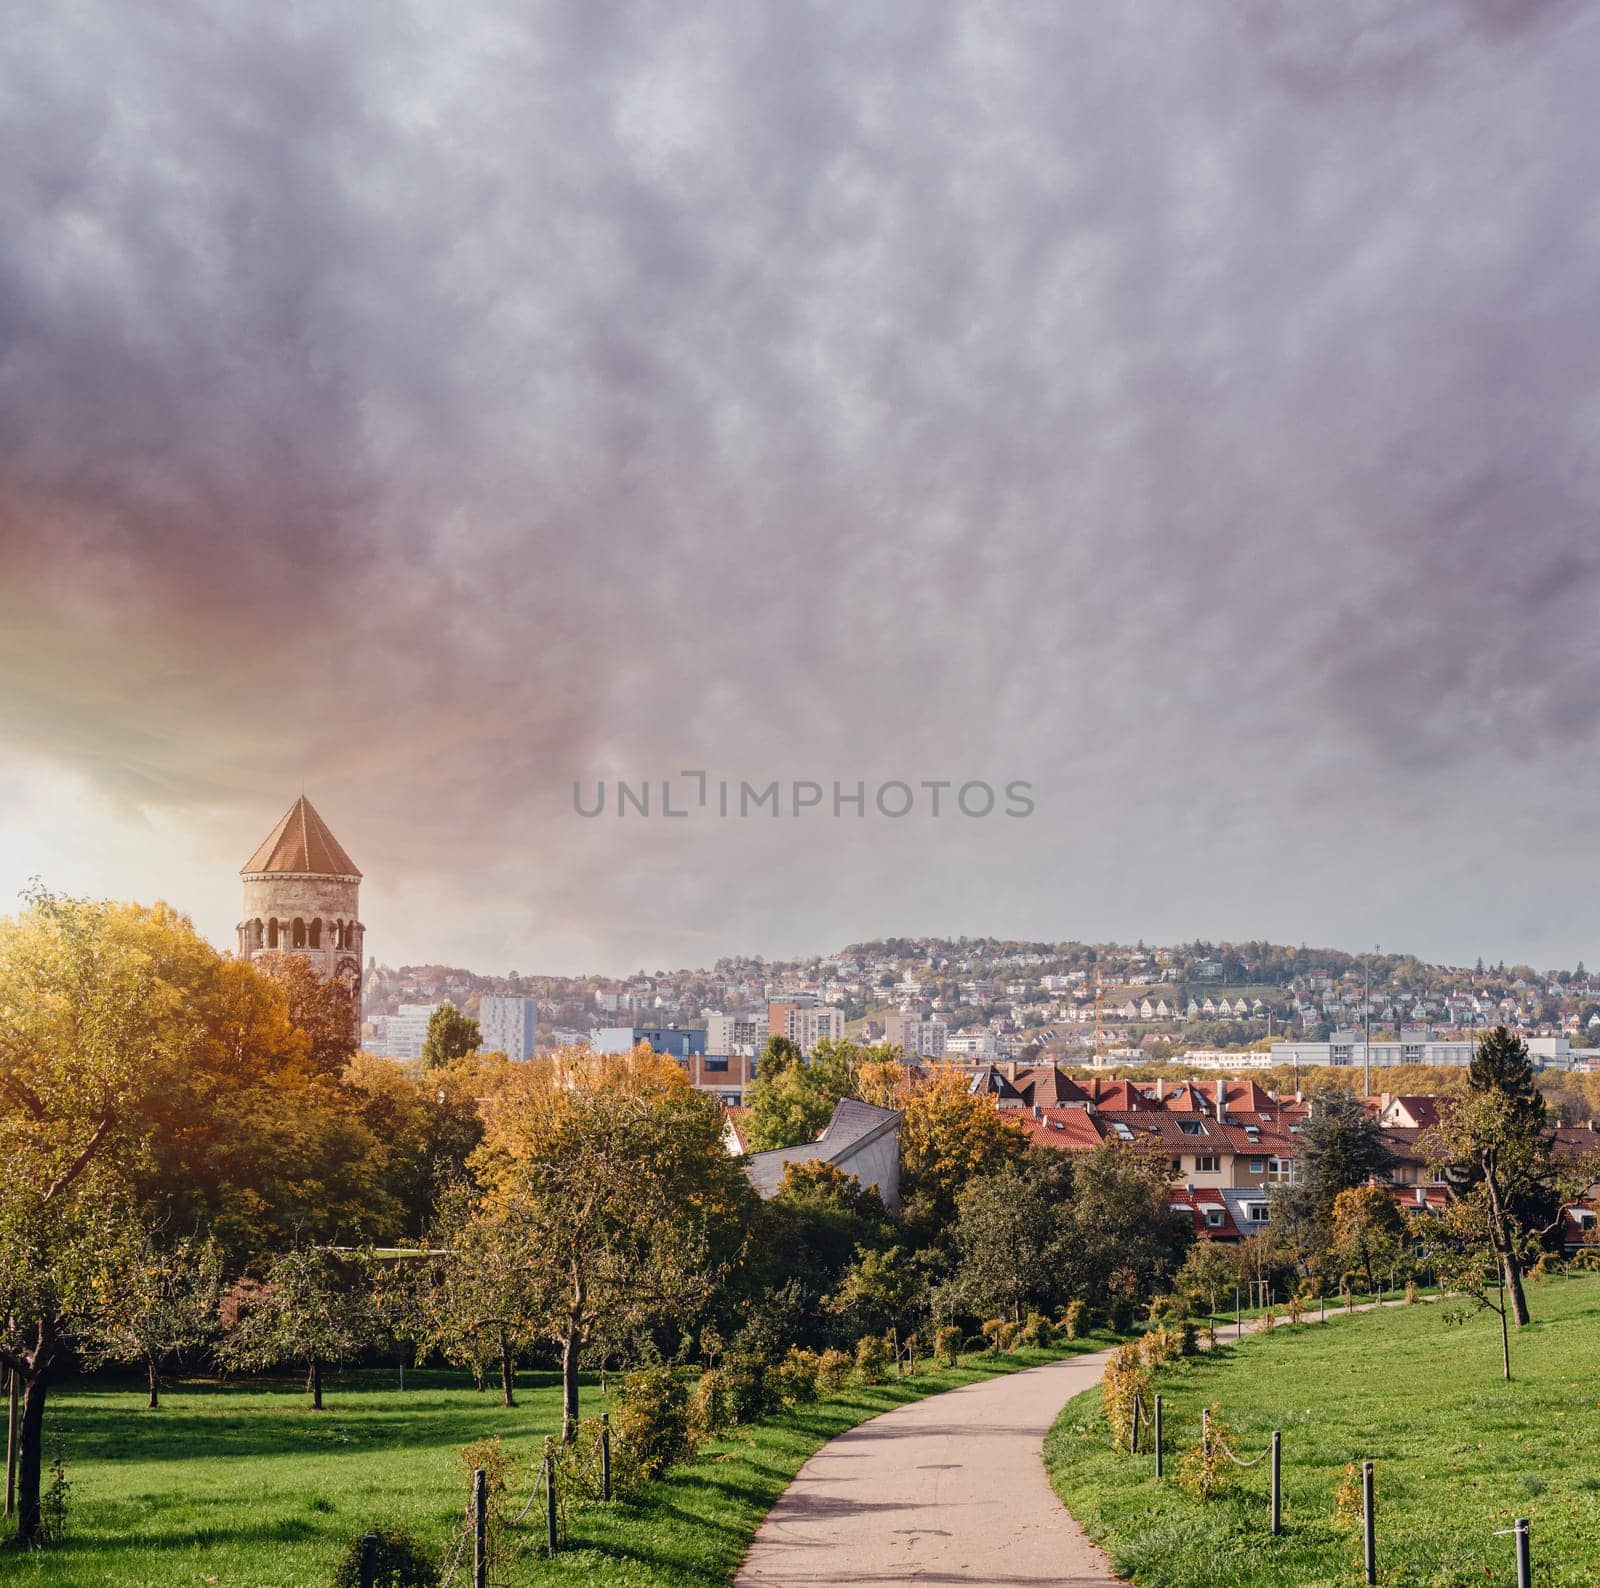 Germany, Stuttgart panorama view. Beautiful houses in autumn, Sky and nature landscape. Vineyards in Stuttgart - colorful wine growing region in the south of Germany with view over Neckar Valley. Germany, Stuttgart city panorama view above vineyards, industry, houses, streets, stadium and highway at sunset in warm orange light.